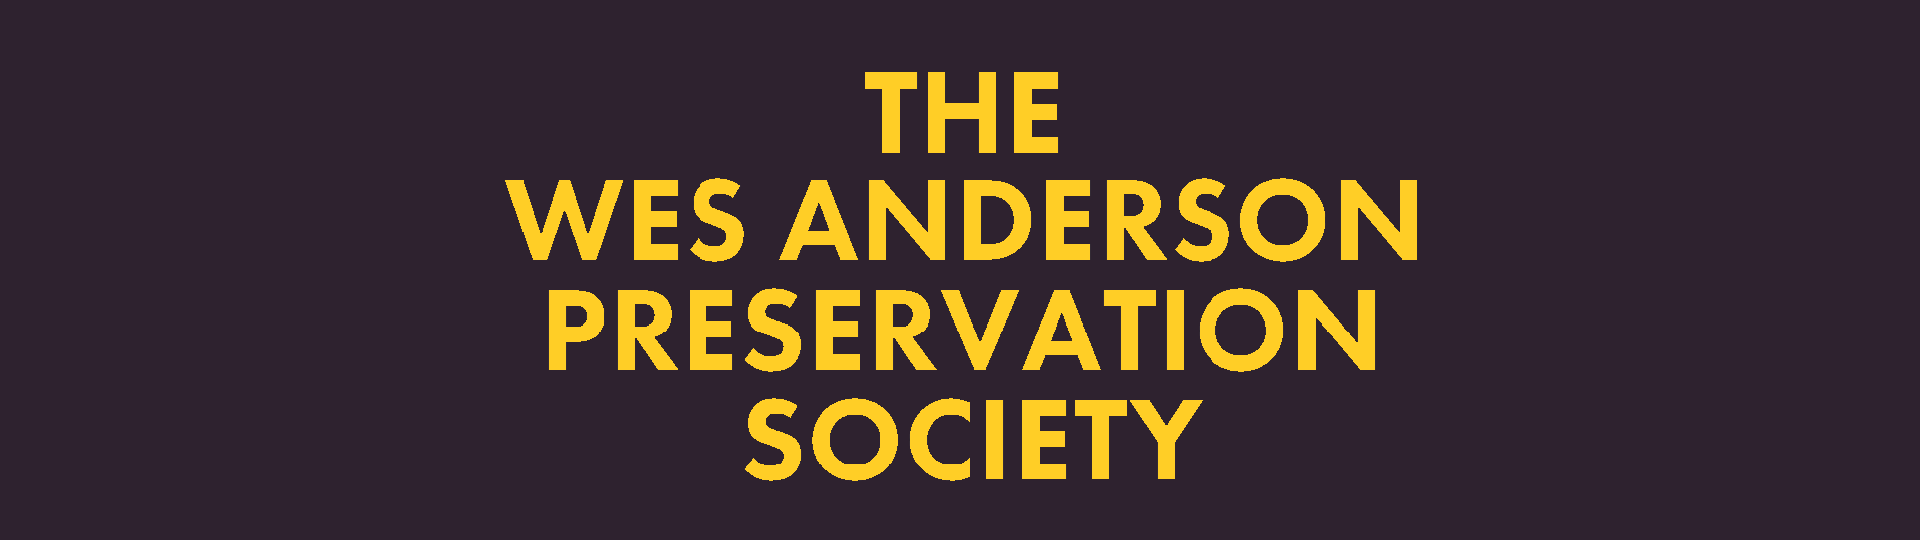 The Wes Anderson Preservation Society